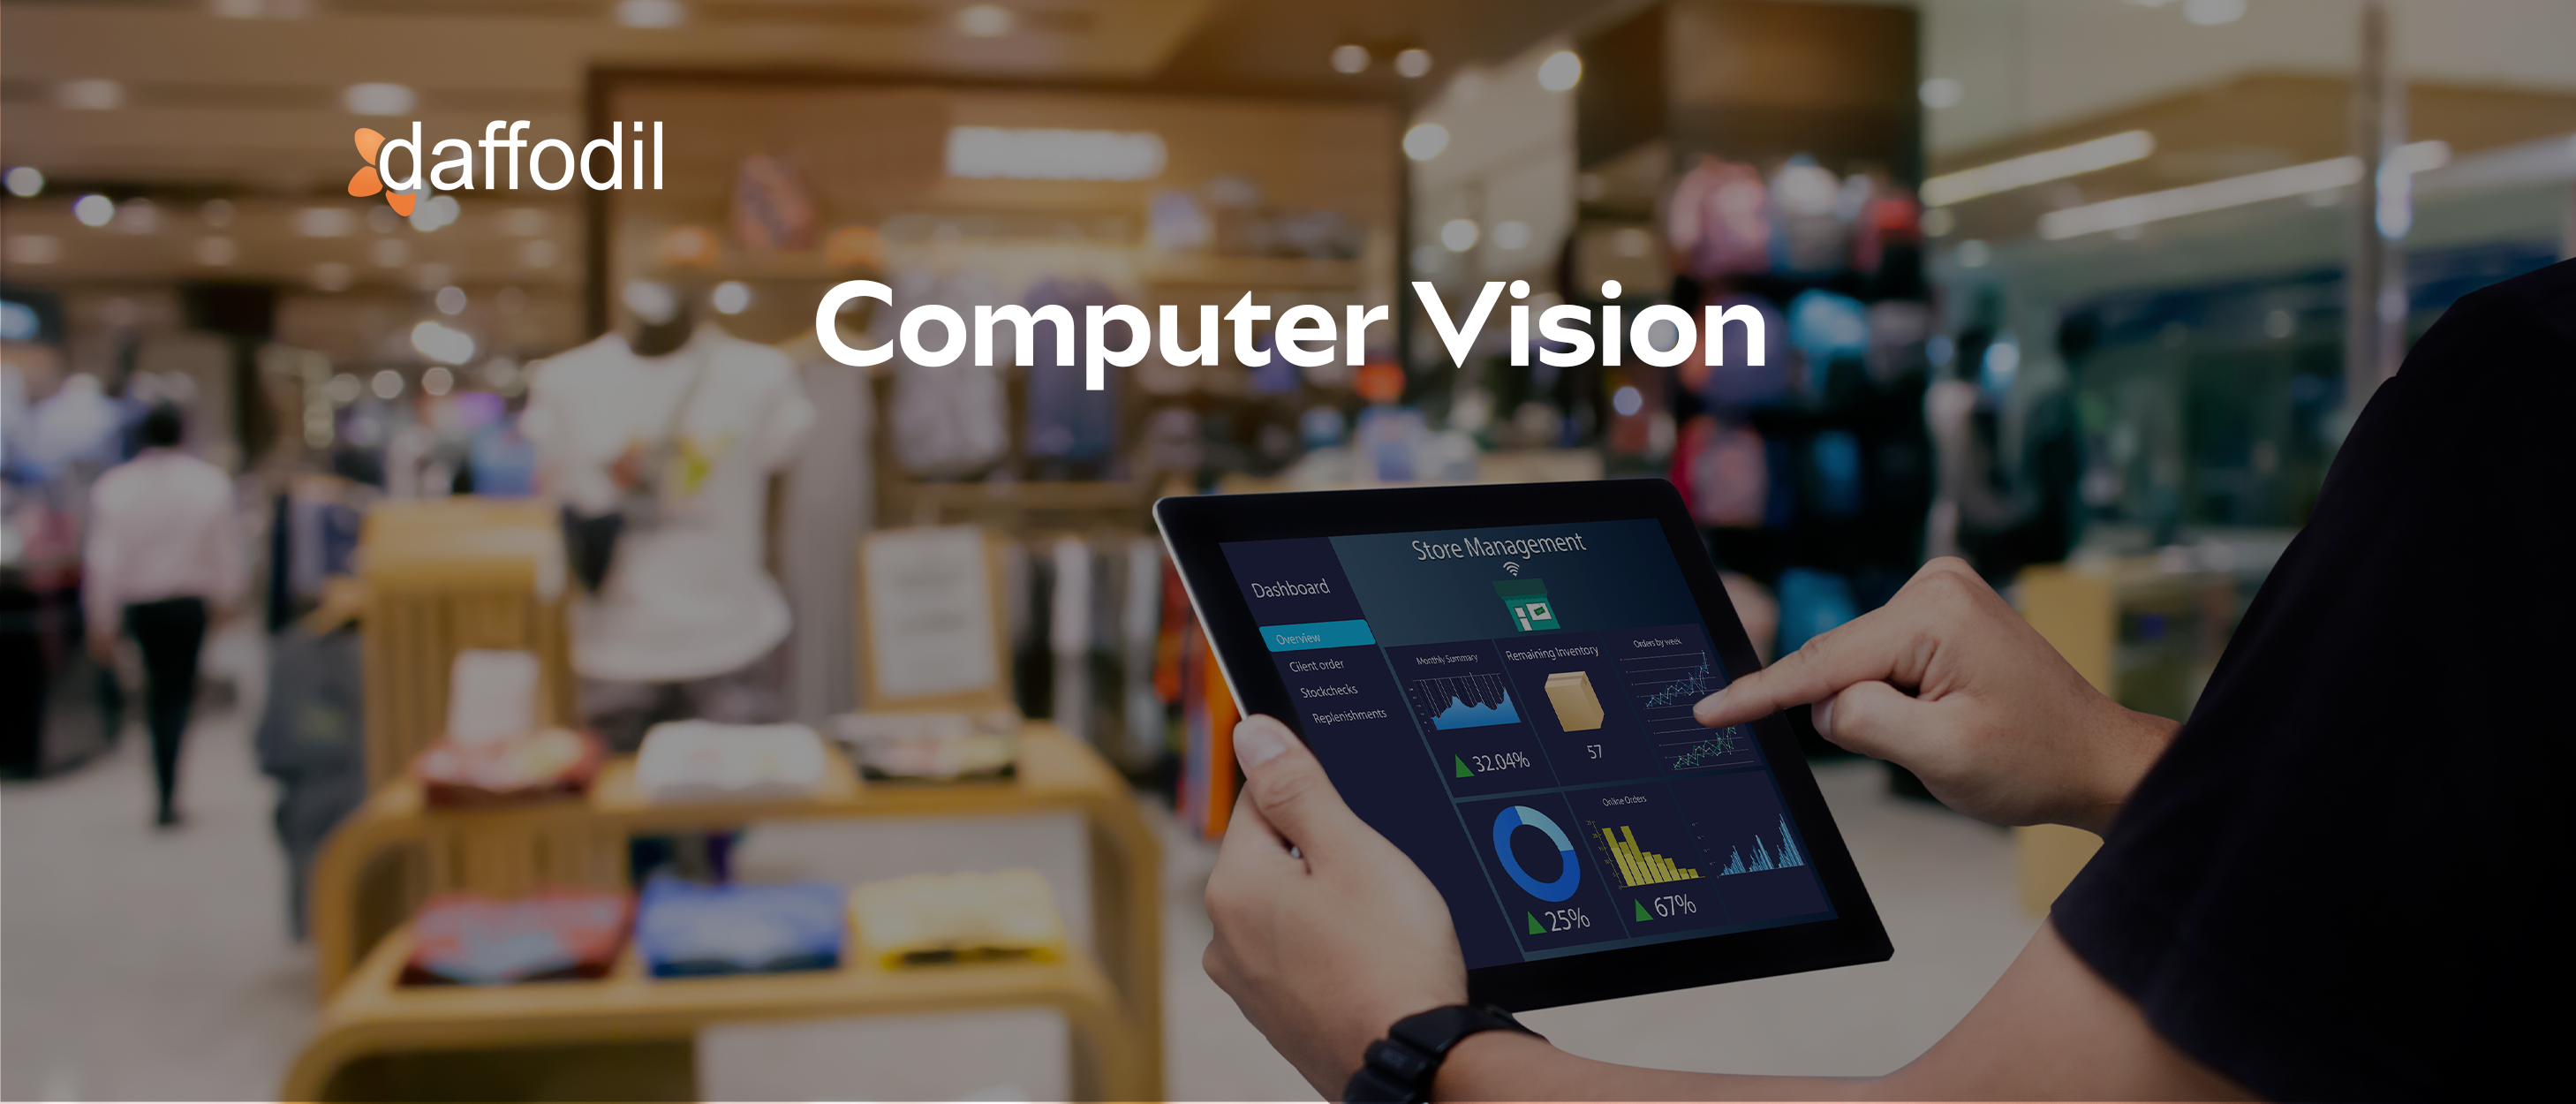 Use of Computer Vision Application in Retail